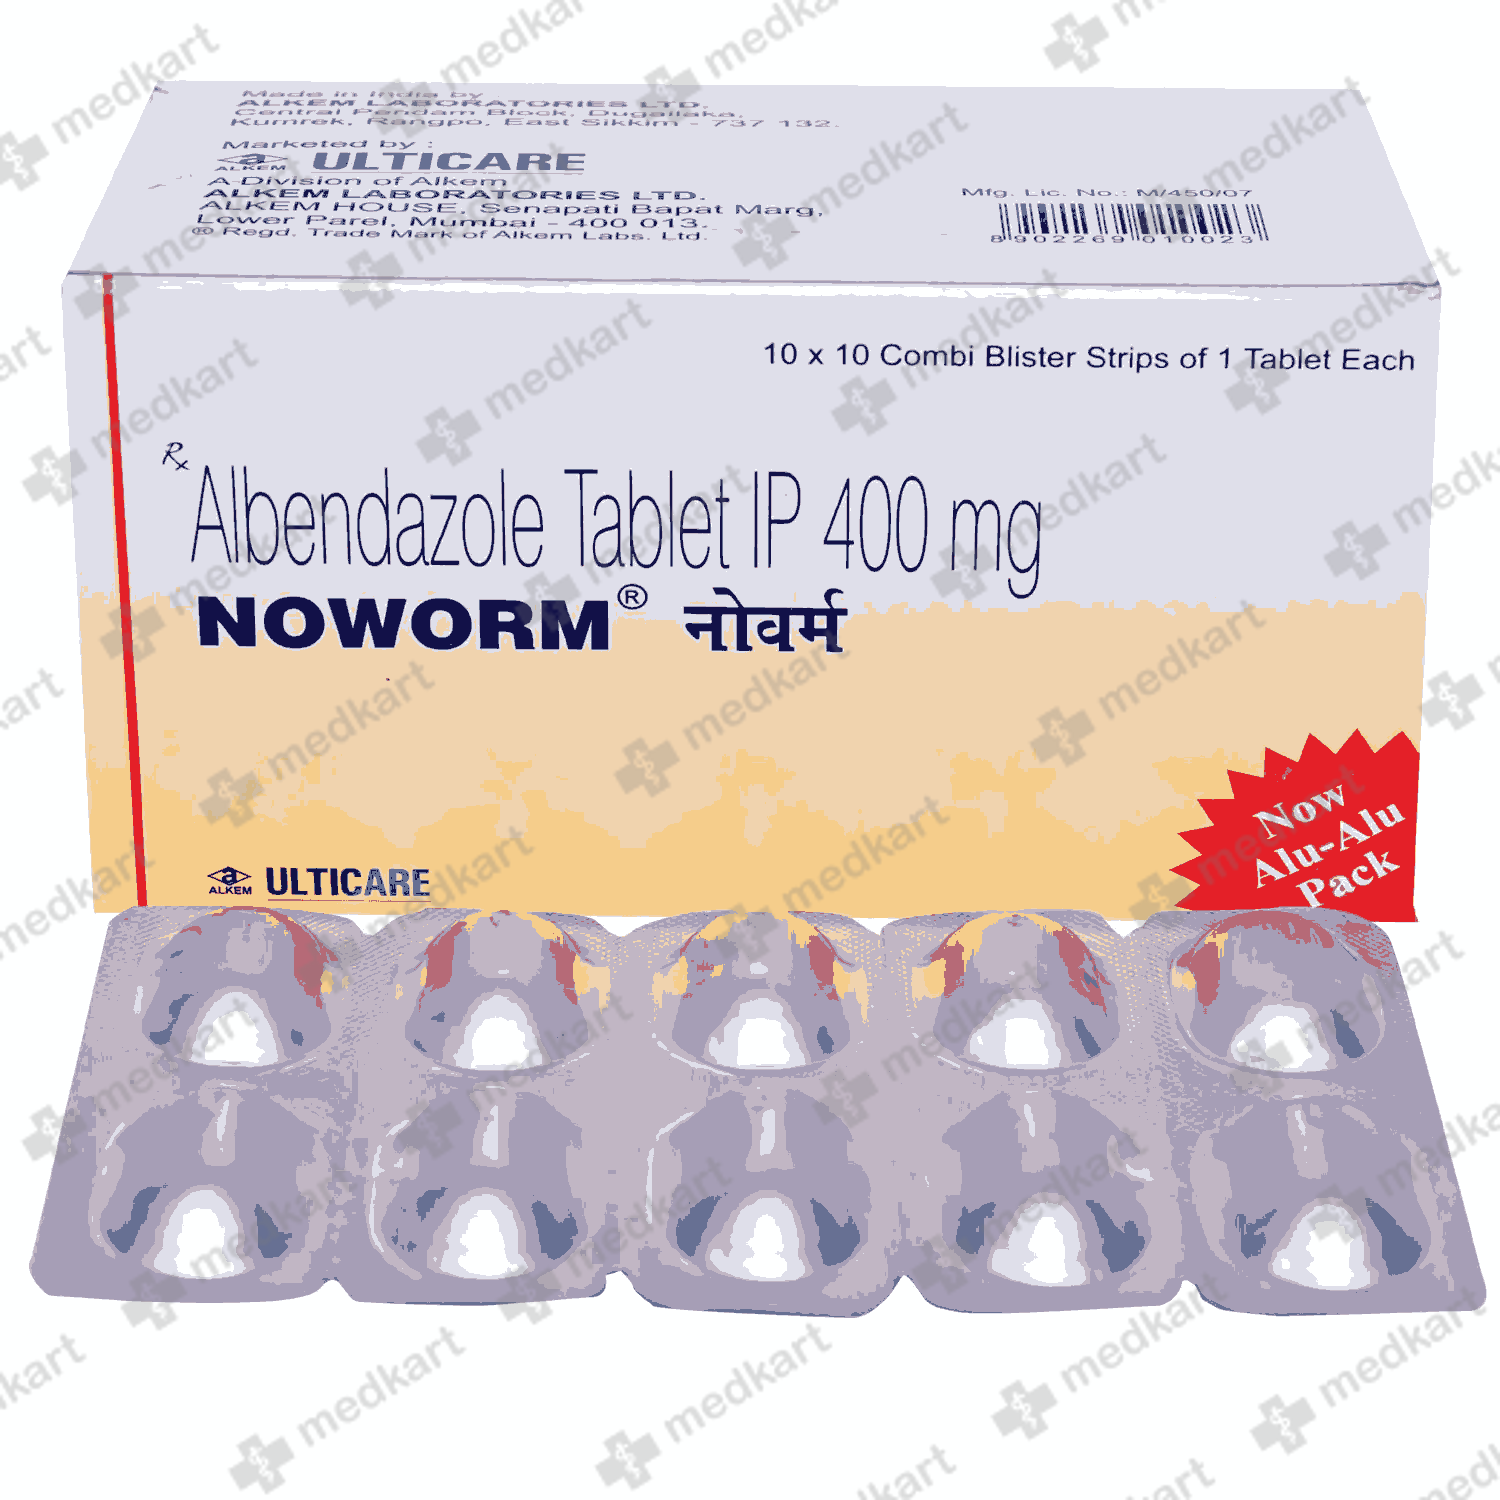 NOWORM 400MG TABLET 1'S